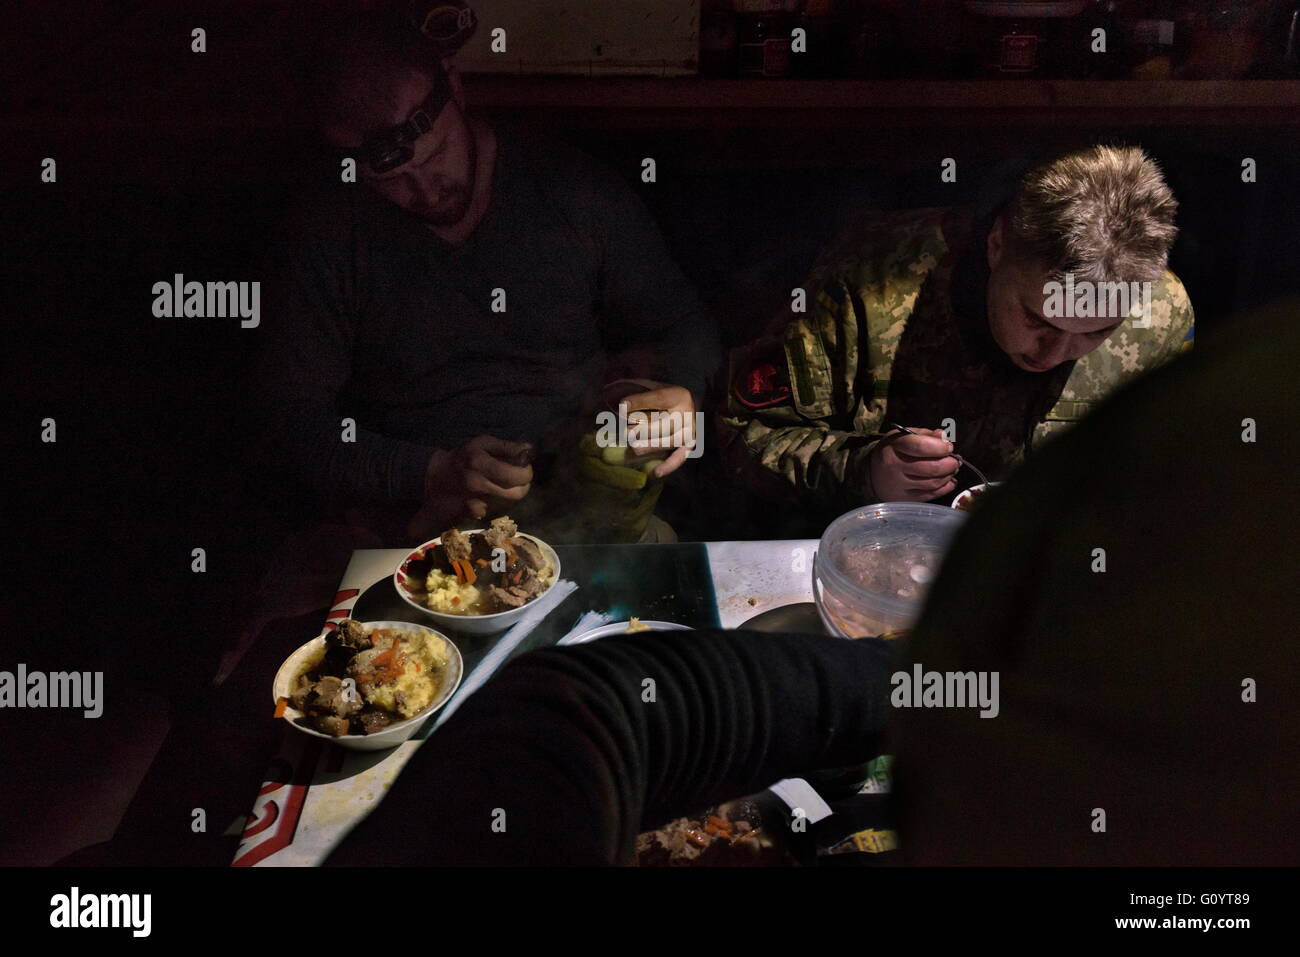 Mar 9, 2016 - Avdiivka, Ukraine - The electrical generator was knocked out during a night of shelling. The men eat a pork and plum stew by flashlight in the relative safety of their bunker. The group boasts that Right Sector has the best food on the front lines. In the now abandoned industrial outskirts of Avdiivka, Ukraine, the 74th battalion of the Ukrainian army maintains several small positions within 100 meters of those held by separatists troops of the Donetsk People's Republic (DNR). Despite the conditions of the Minsk ceasefire agreement, separatists continue to fire 82mm,120mm and 152 Stock Photo